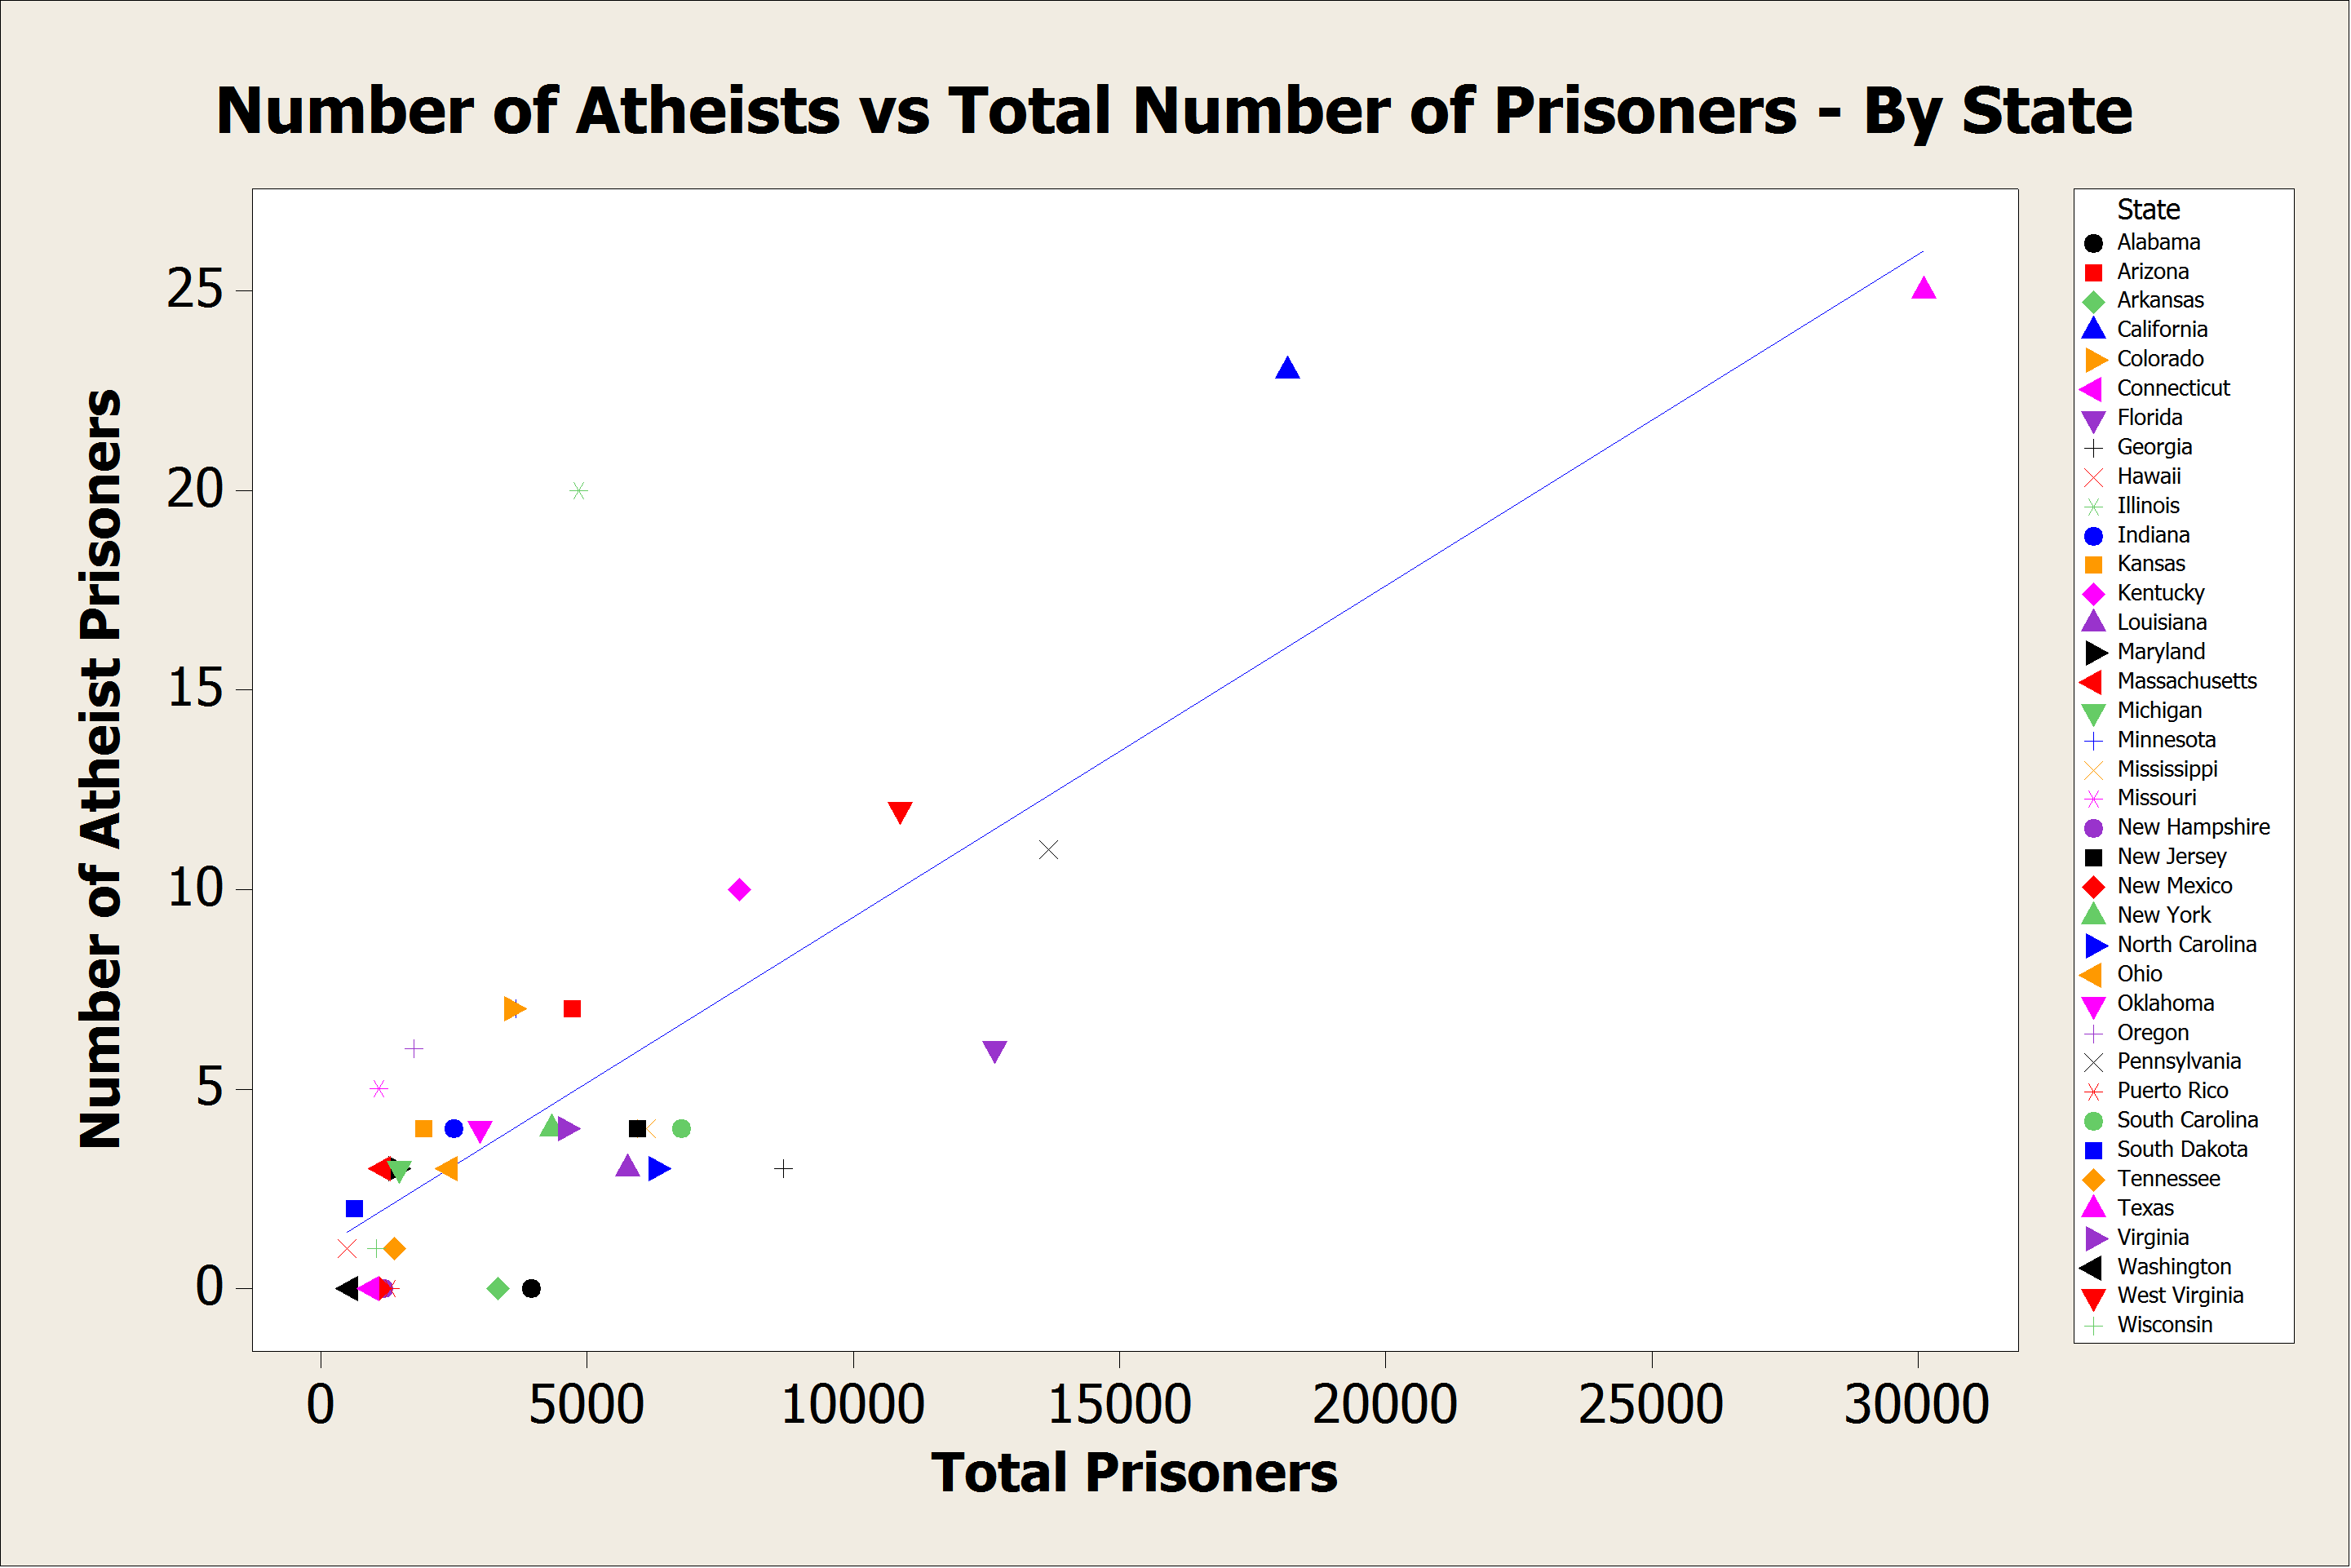 What Else Can We Learn from the Atheist Prison Data?